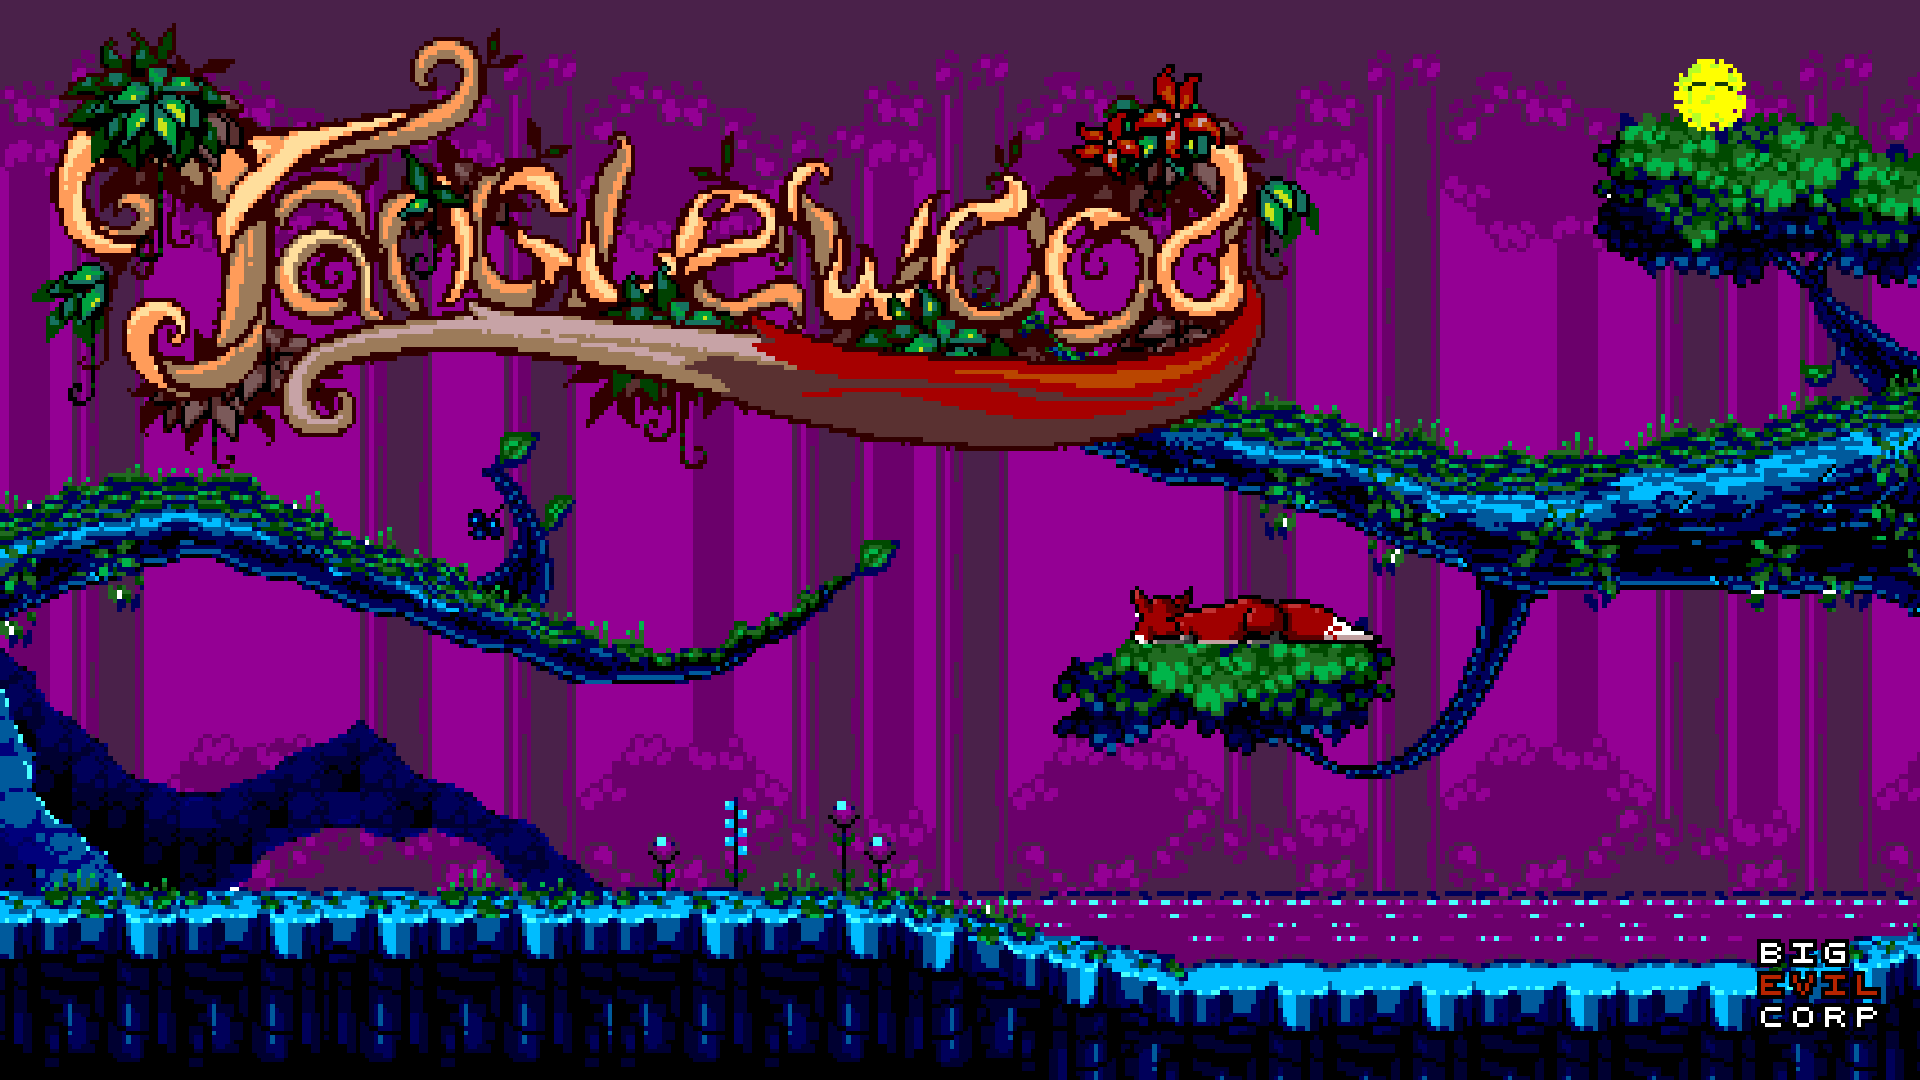 New Games Created for Classic Systems - Tanglewood